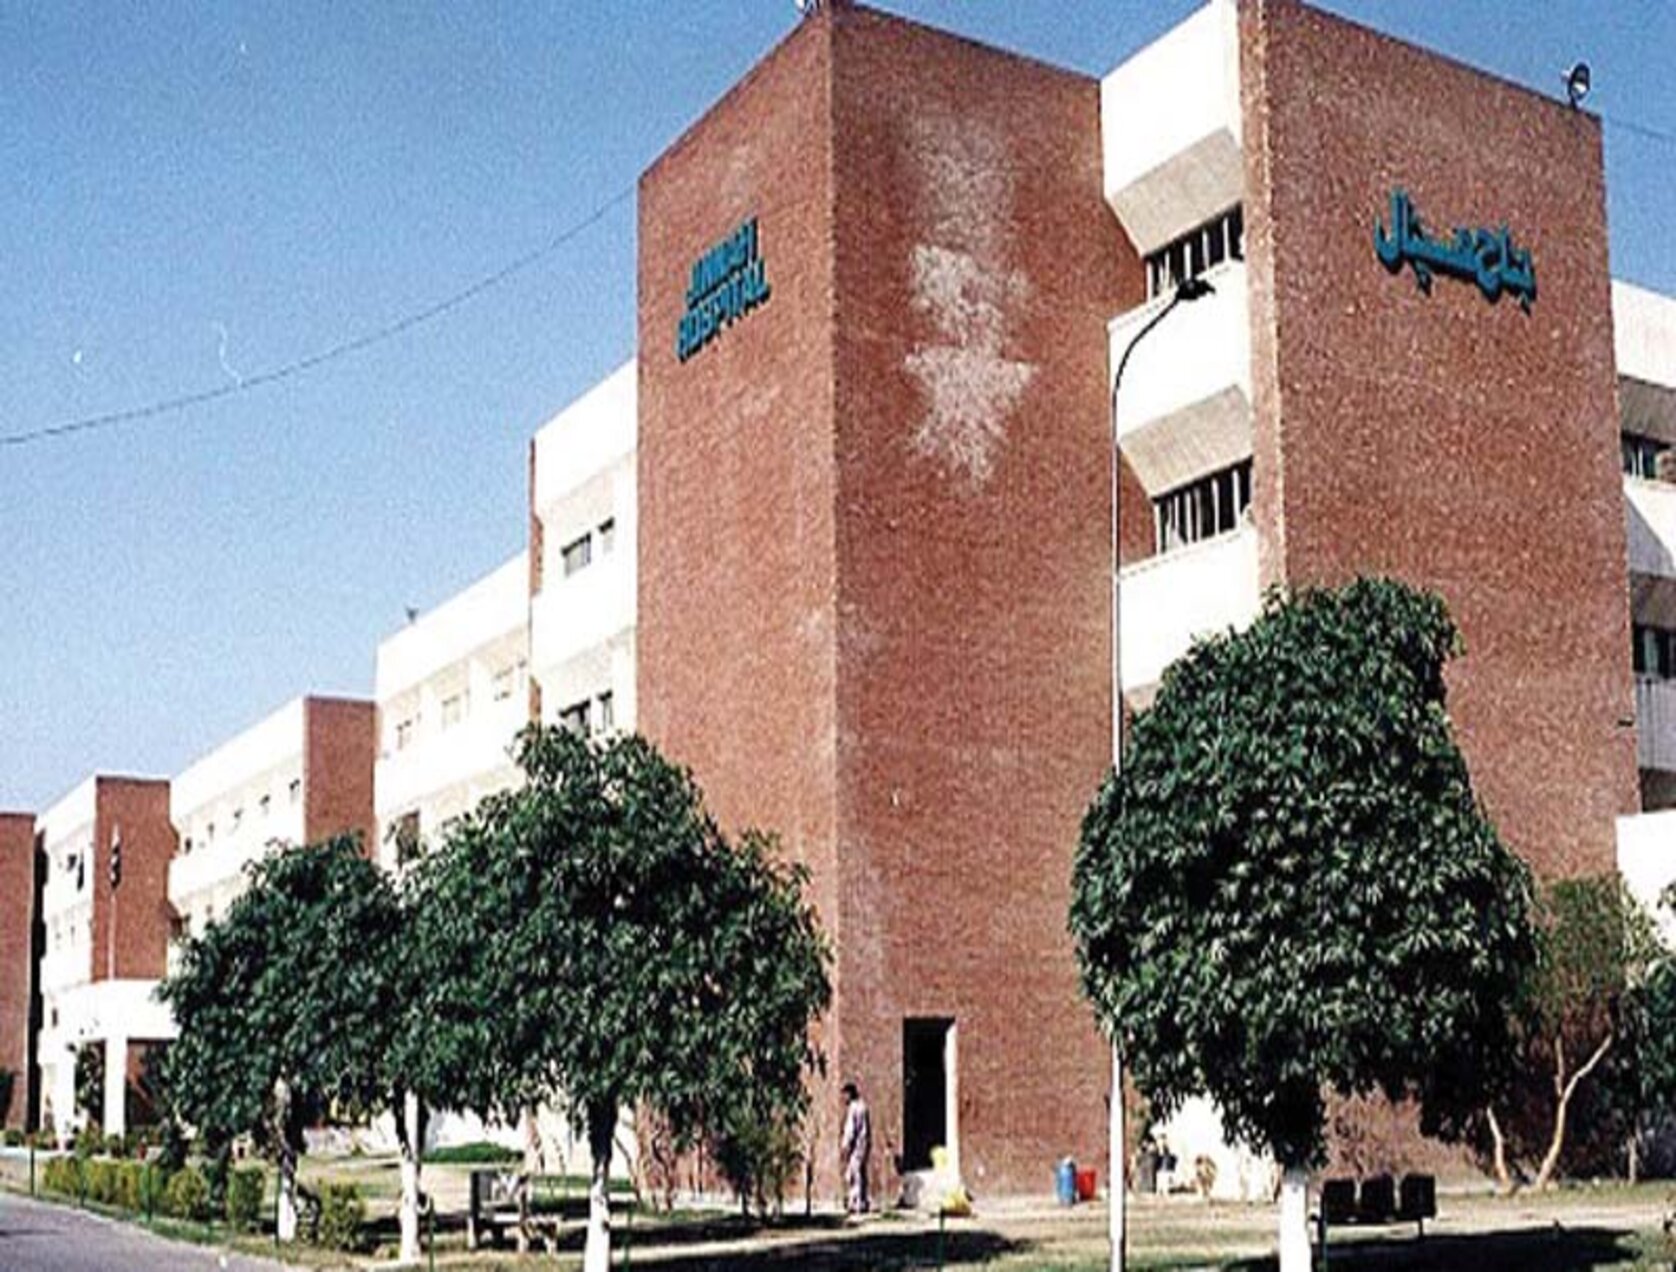 Punjab Institute of Cardiology (PIC)